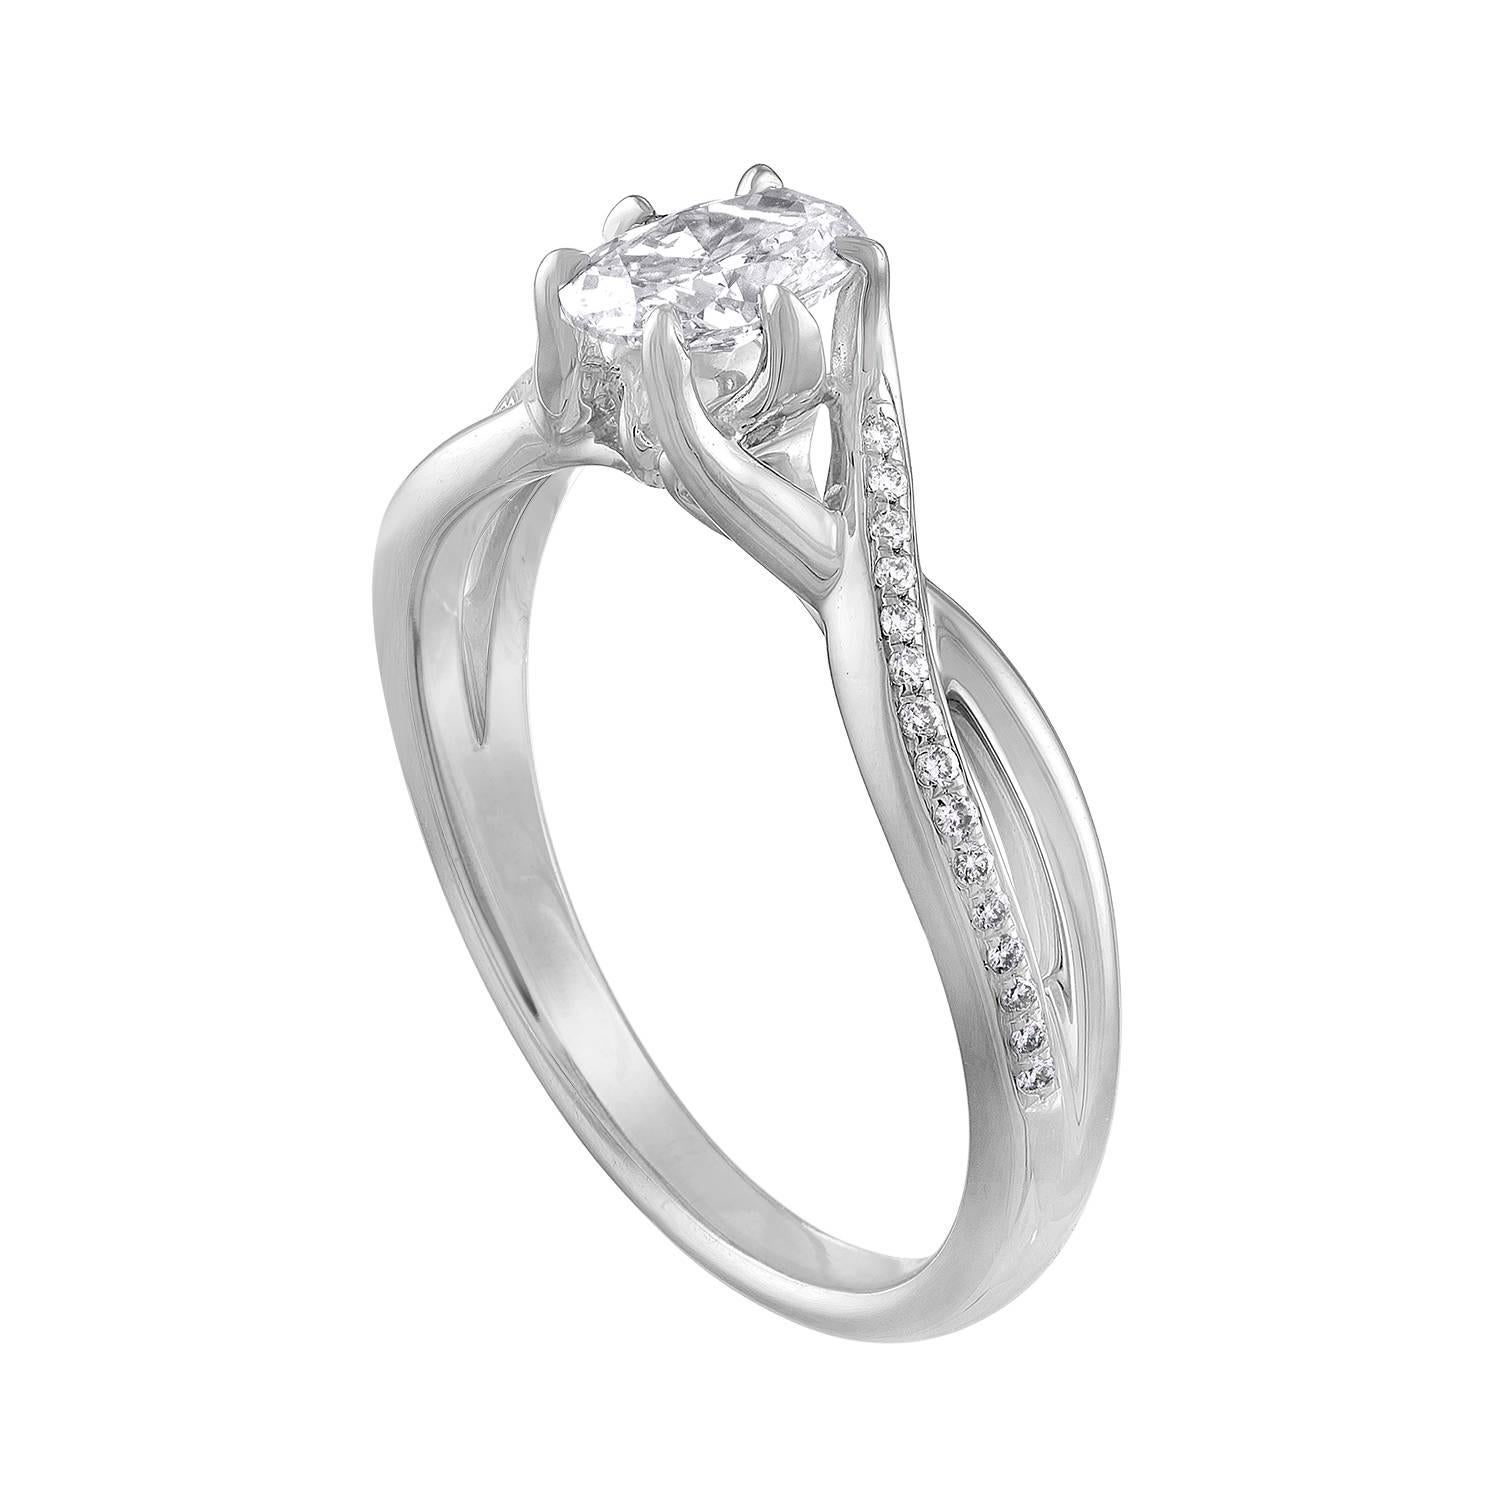 Stunning Engagement Ring With Crisscross Split Shank.
The ring is 14K White Gold.
The center Diamond Stone is an Oval Cut 0.52 Carats I VVS.
There are 0.25 Carats in small round diamonds F VS.
The total weight of all diamonds is 0.77 Carats.
The